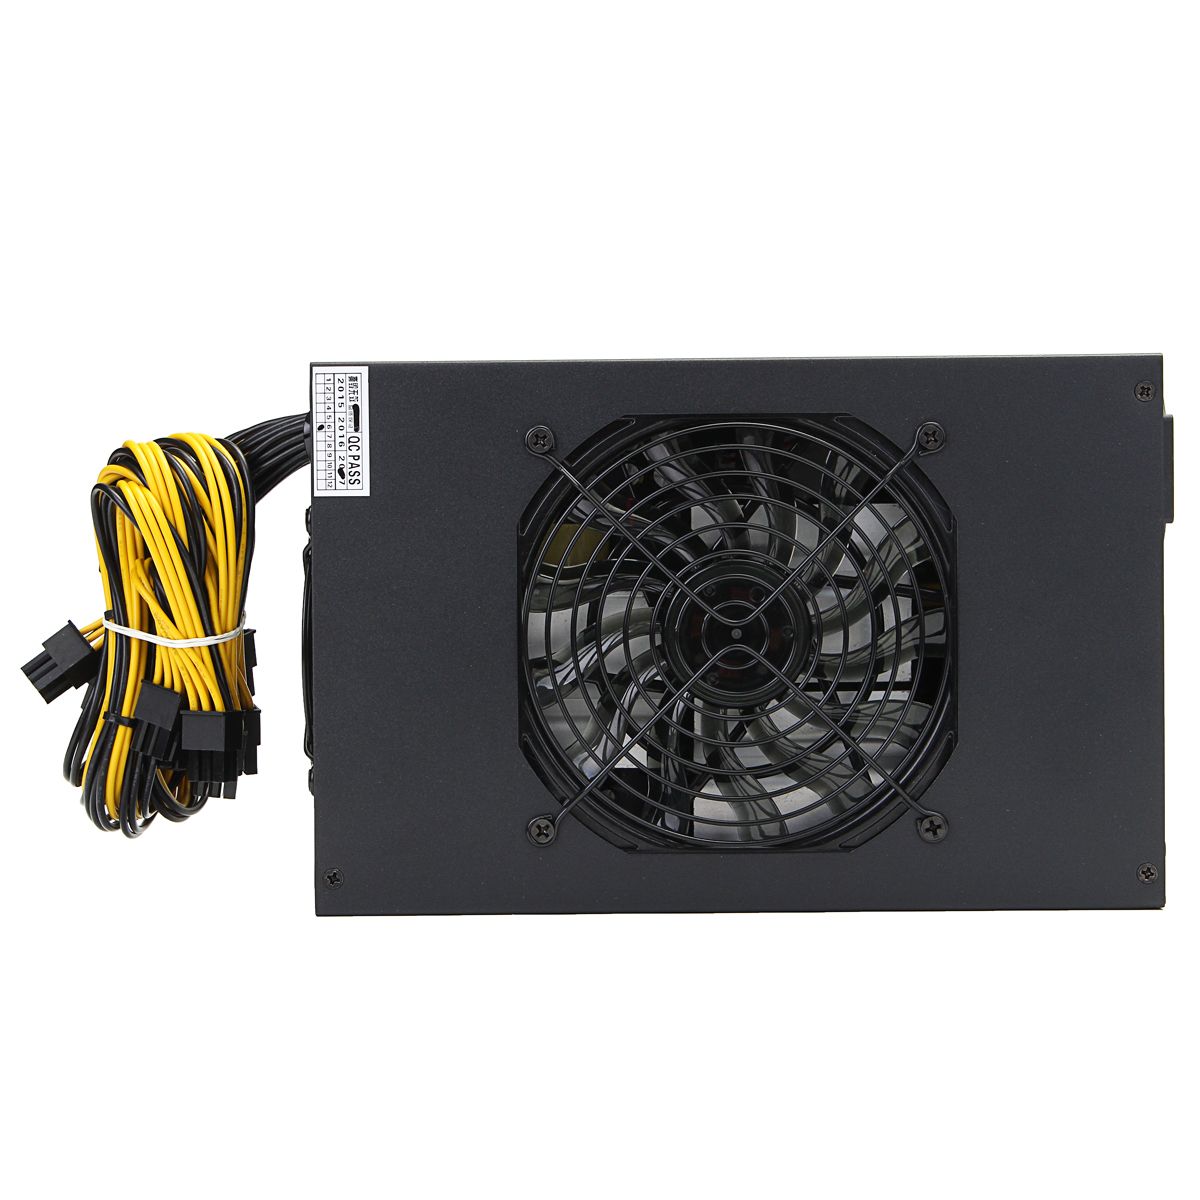 BTB1600W-Power-Supply-Suitable-For-A6-A7-S7-S9-L3-R4-Miner-10x6-Pin-1175060